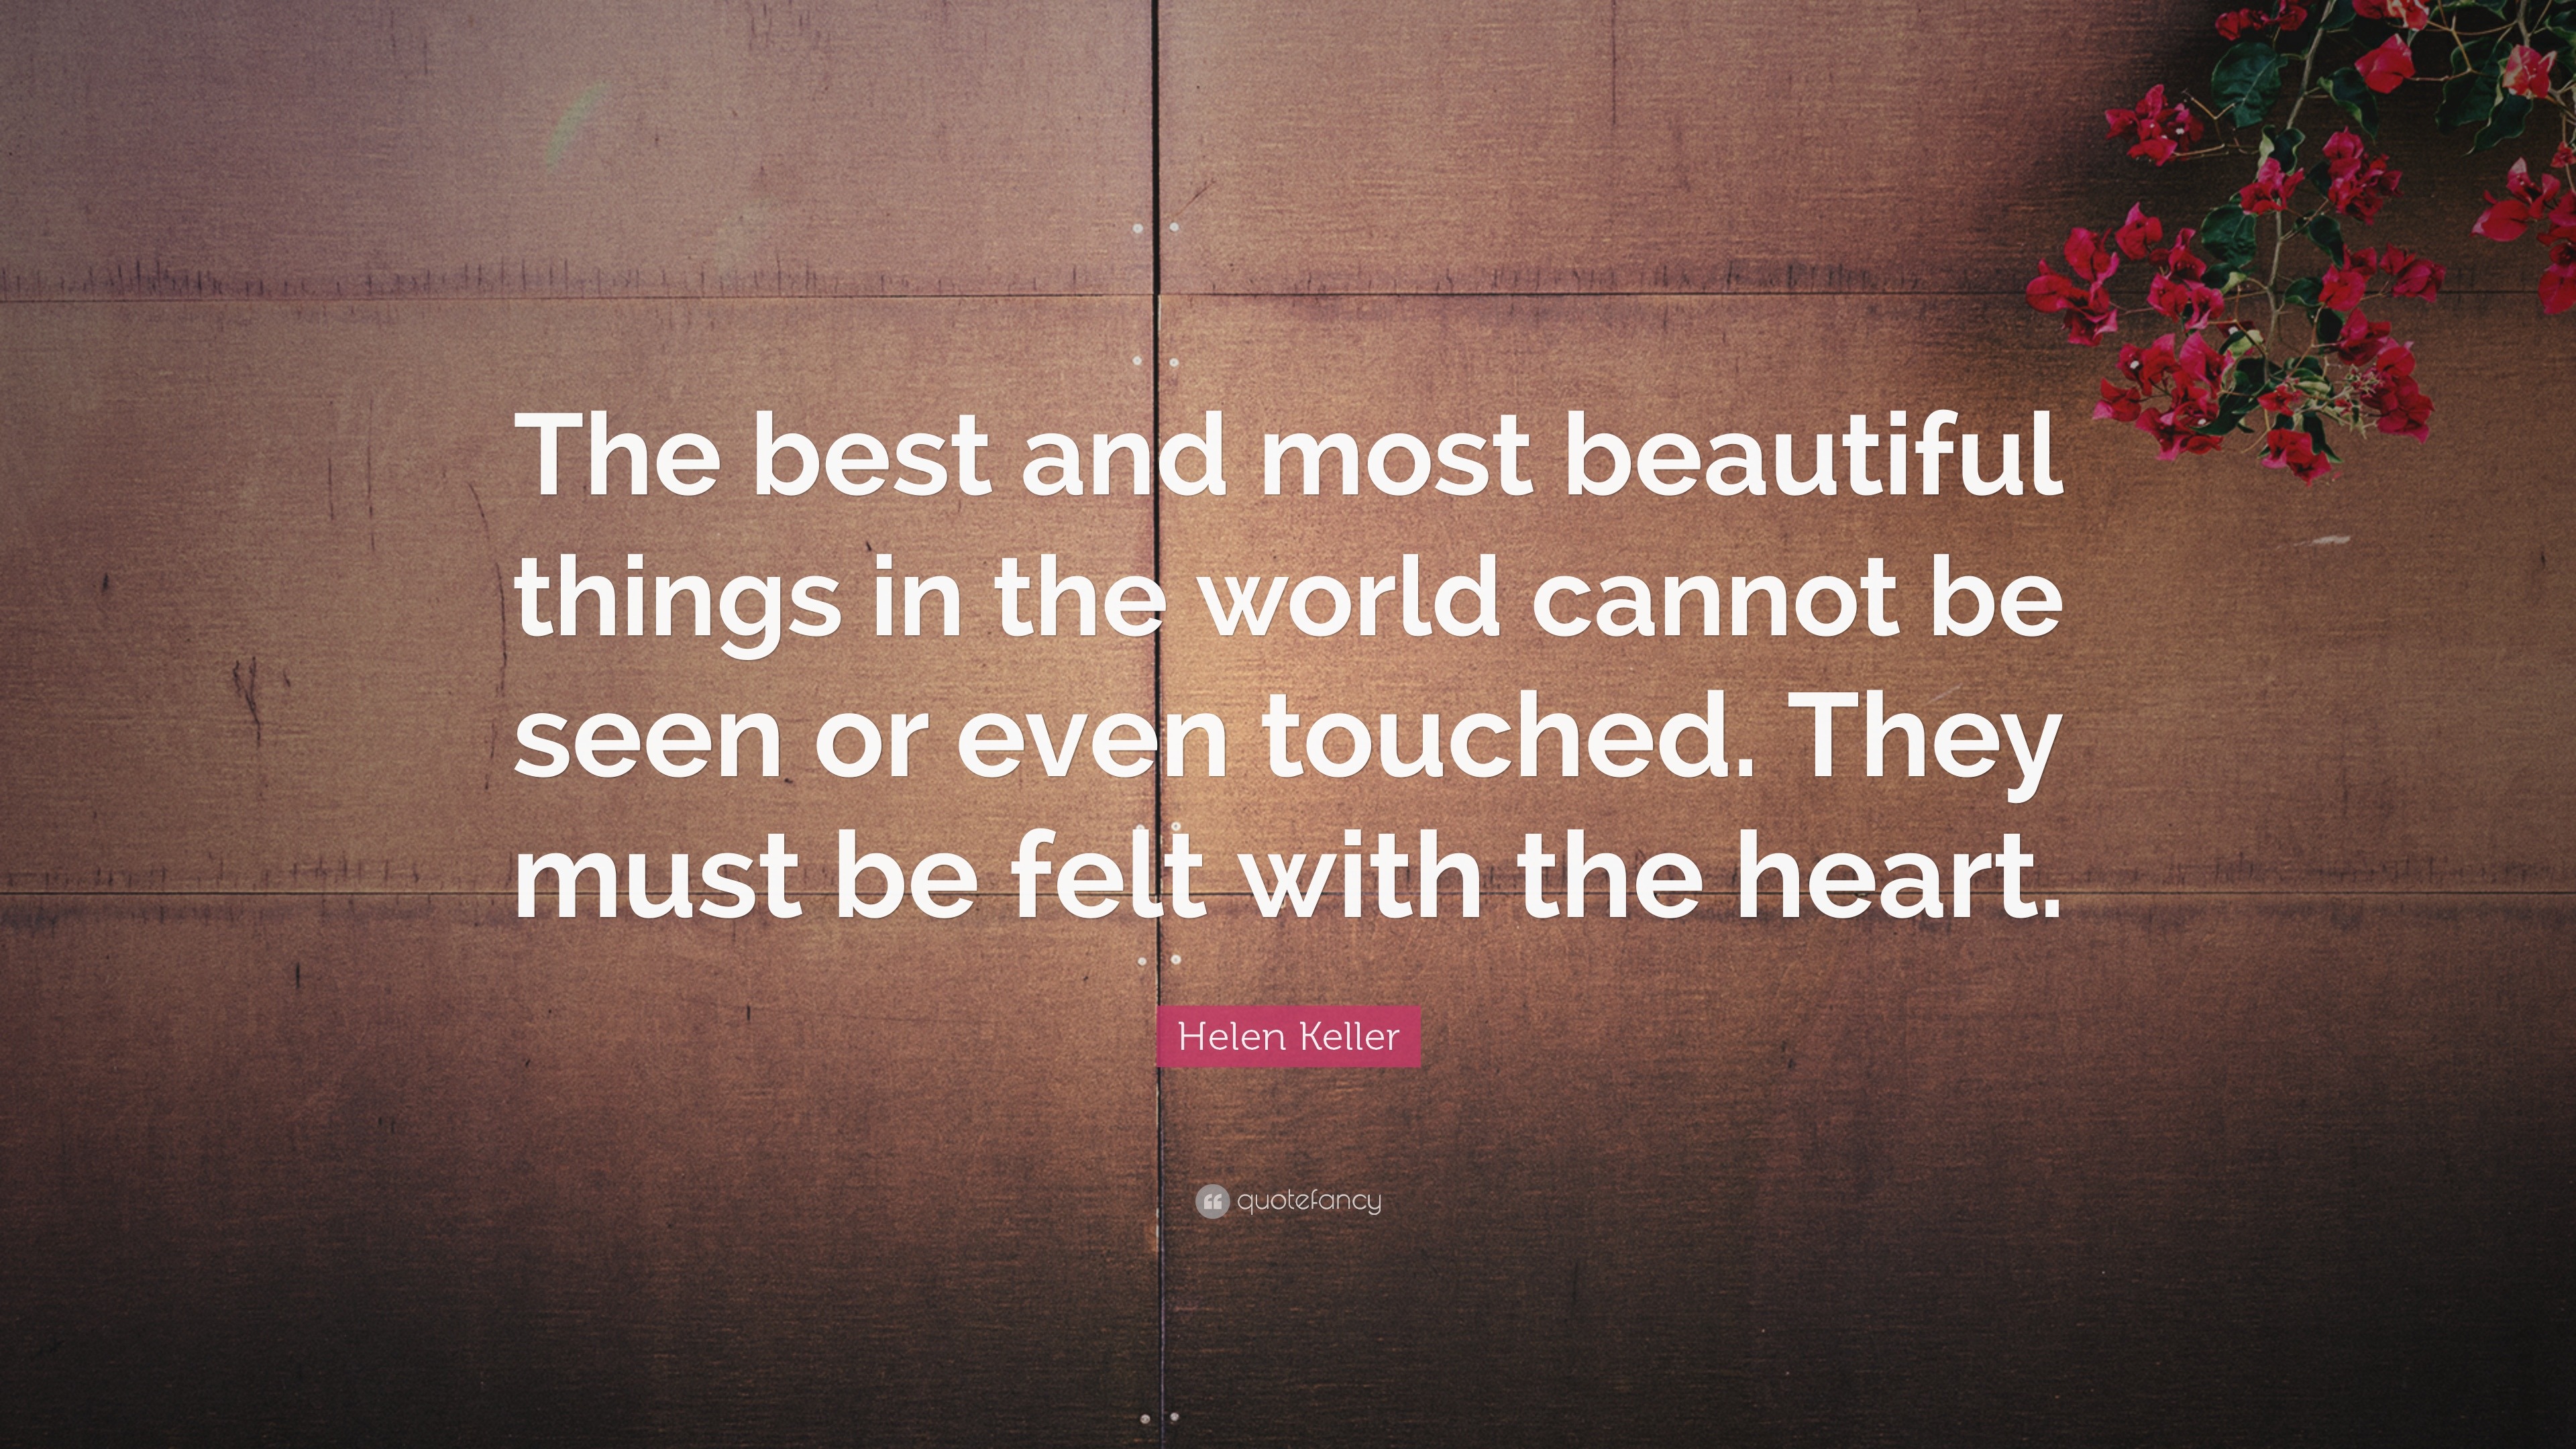 Helen Keller Quote “the Best And Most Beautiful Things In The World Cannot Be Seen Or Even